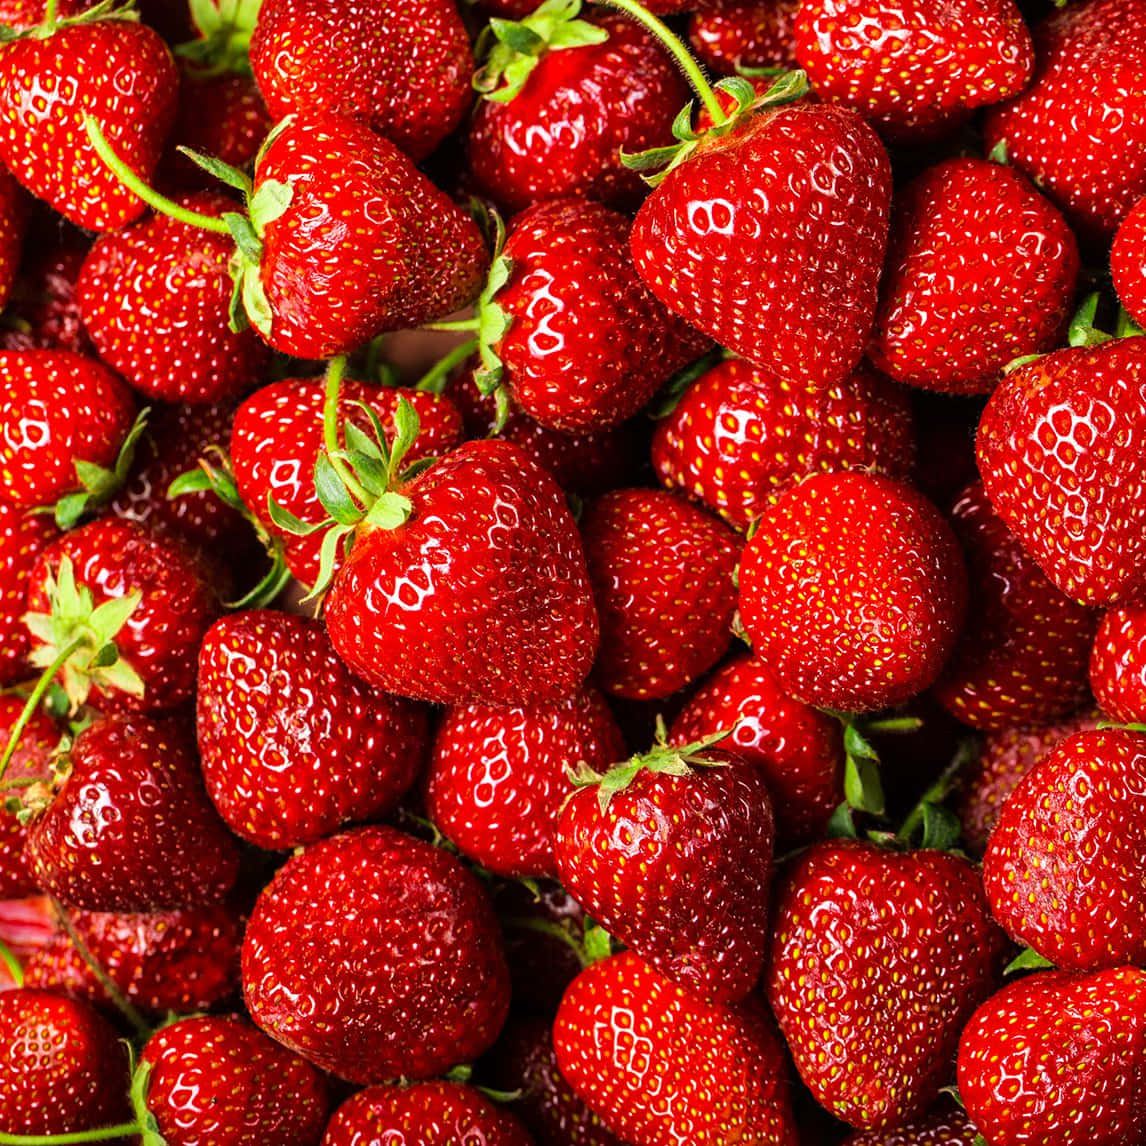 A Close-up View Of Freshly Harvested Strawberries